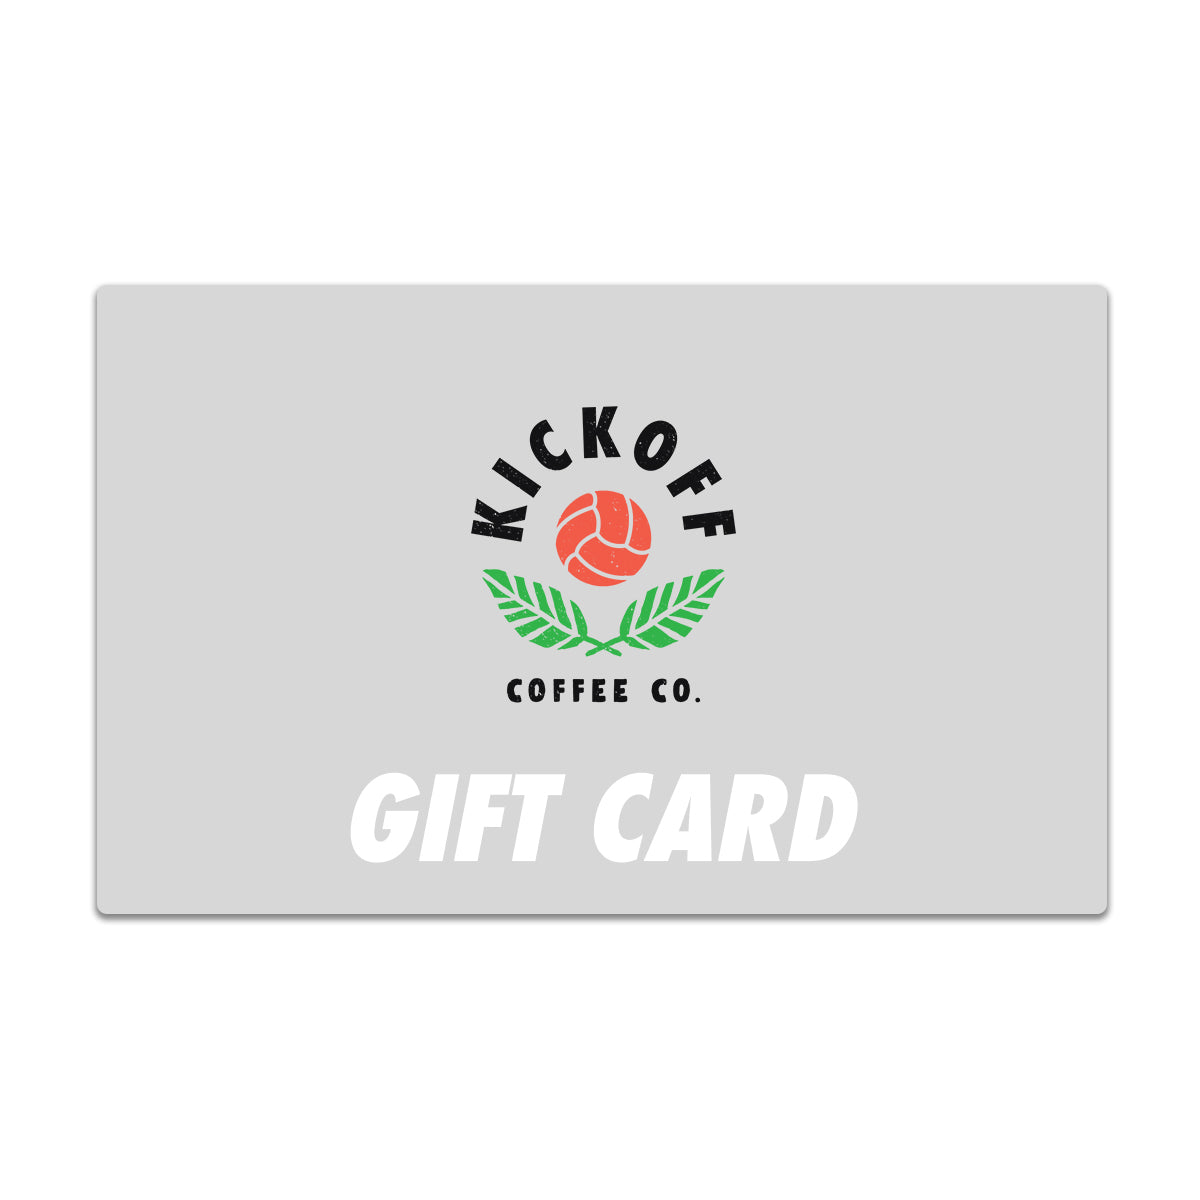 Kickoff Coffee Co Gift Card | Coffee for Soccer People | Specialty Coffee | Soccer Gifts | Soccer Coach | Soccer Dad | Soccer Mom